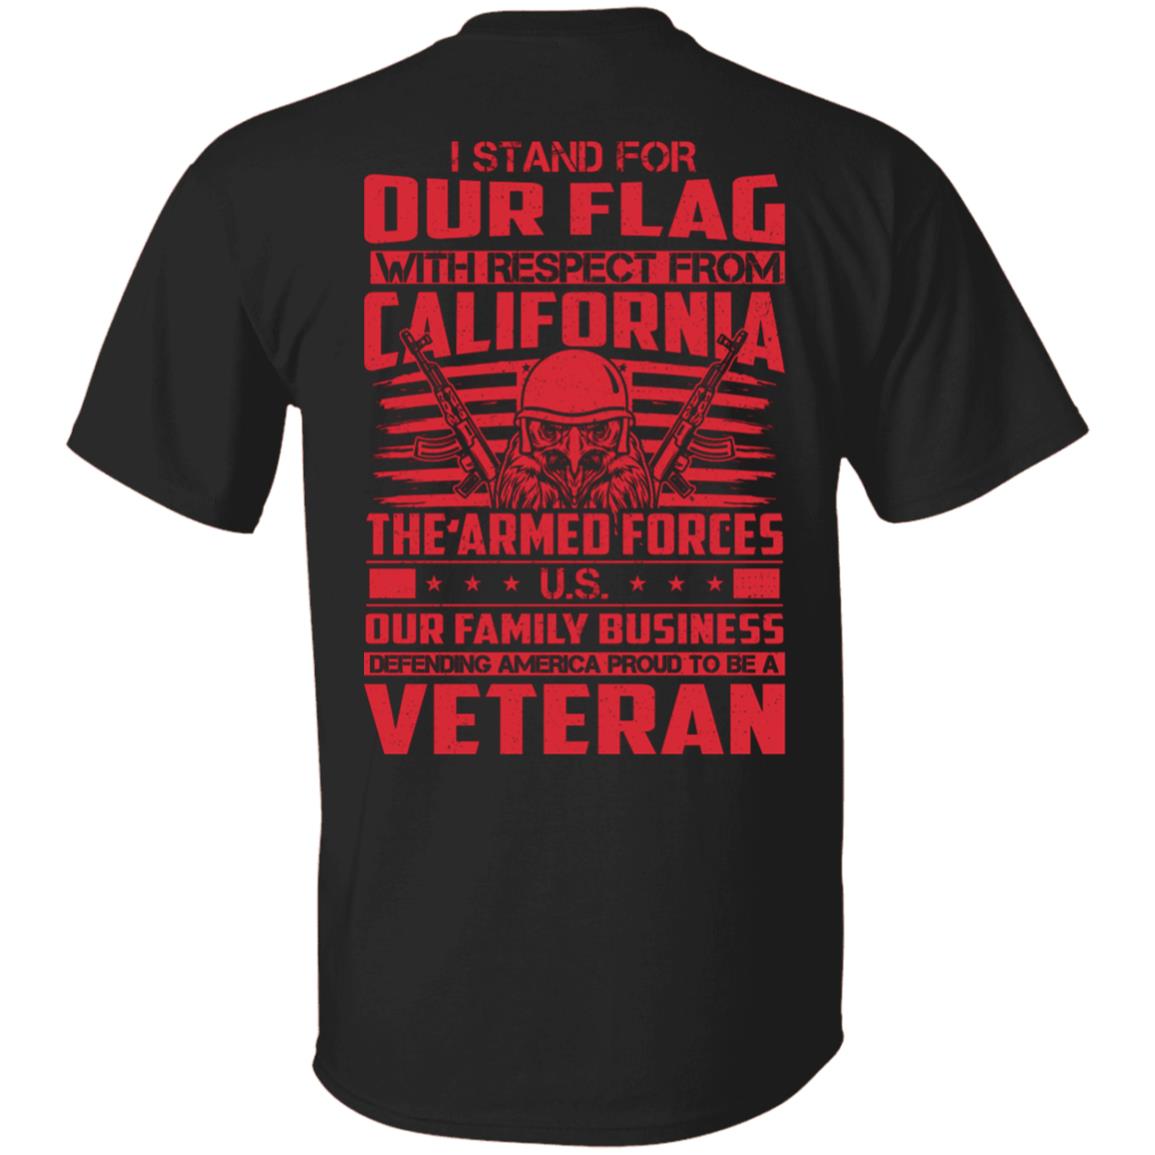 I Stand For Our Flag with Respect from California Veteran Tshirt